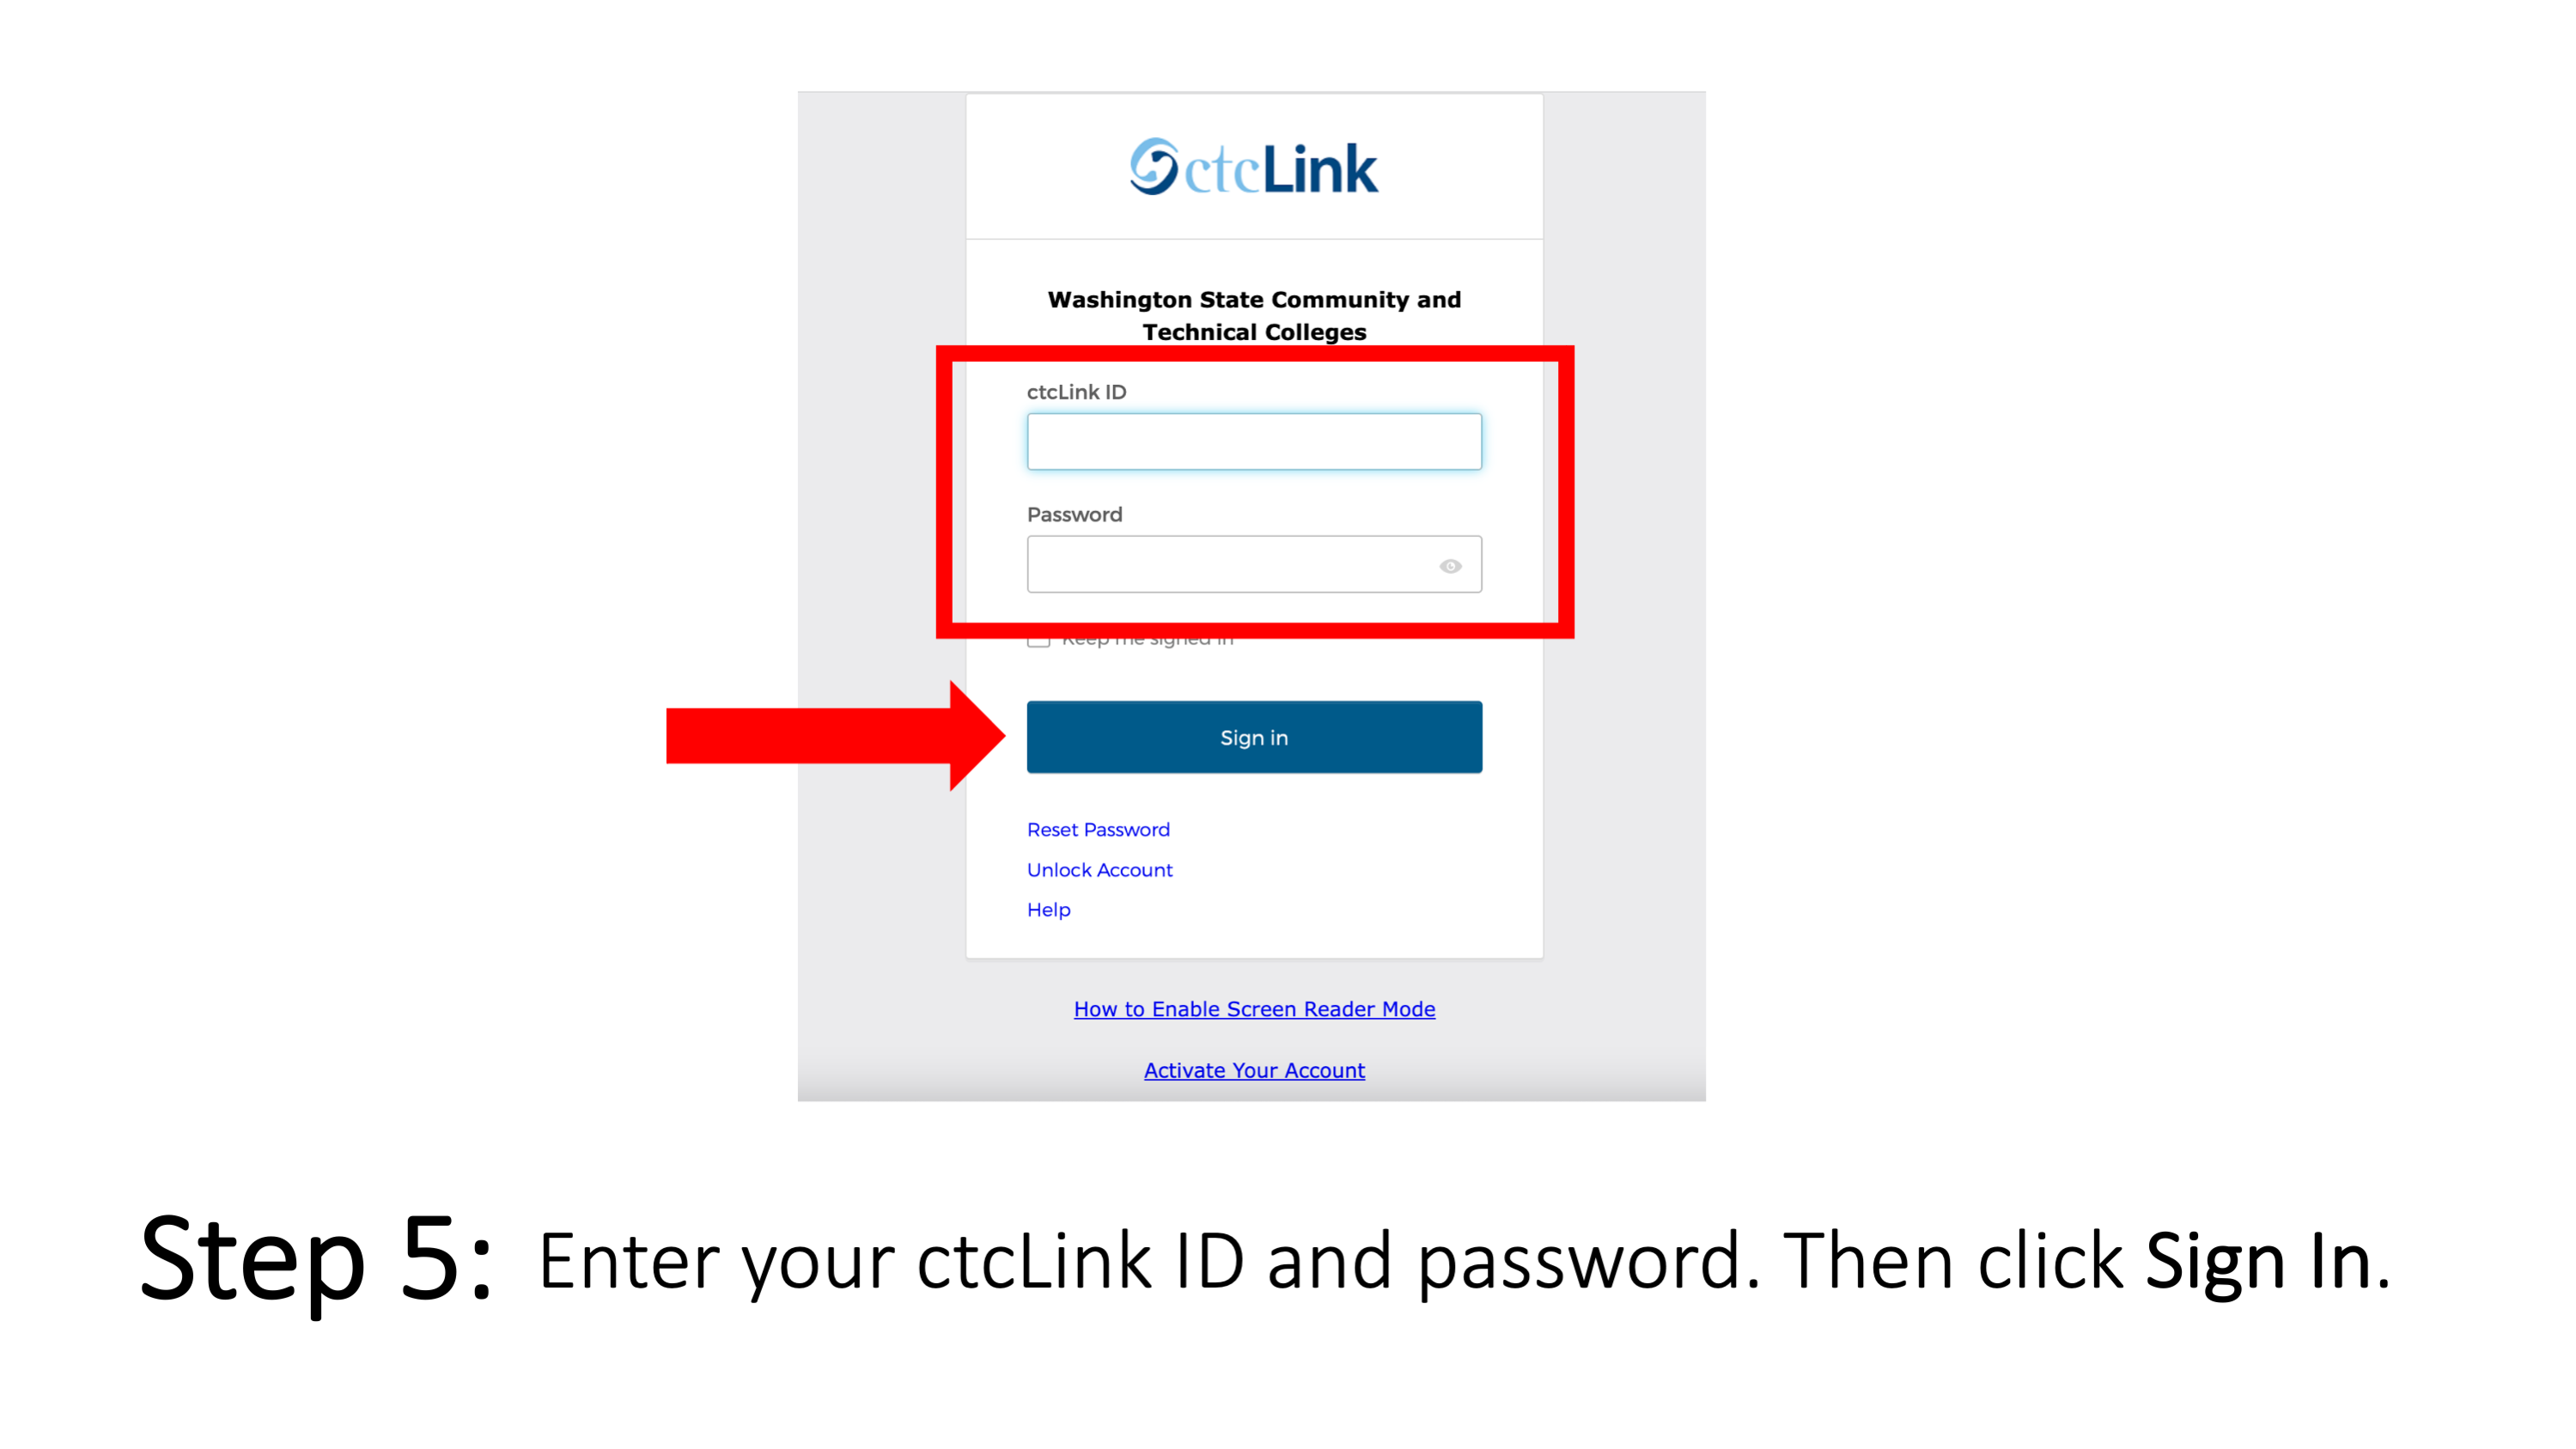 Step 5: Enter your ctcLink ID and password. Then click Sign In.